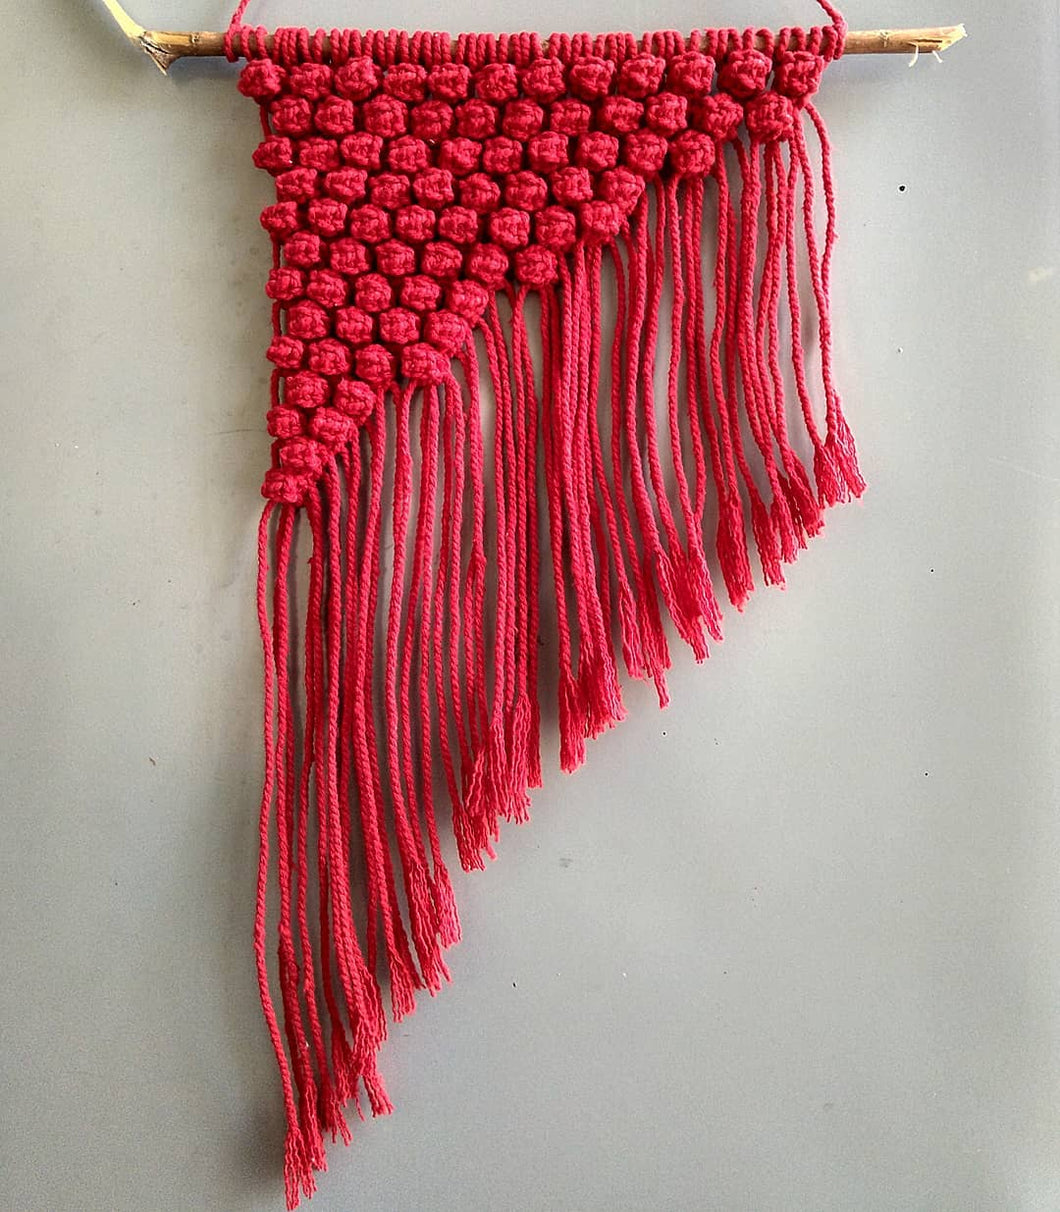 Red - Berry Knot Macrame Wall Hanging | Handmade Yarn Wall Hanging | Crochet Woven Wall Tapestry